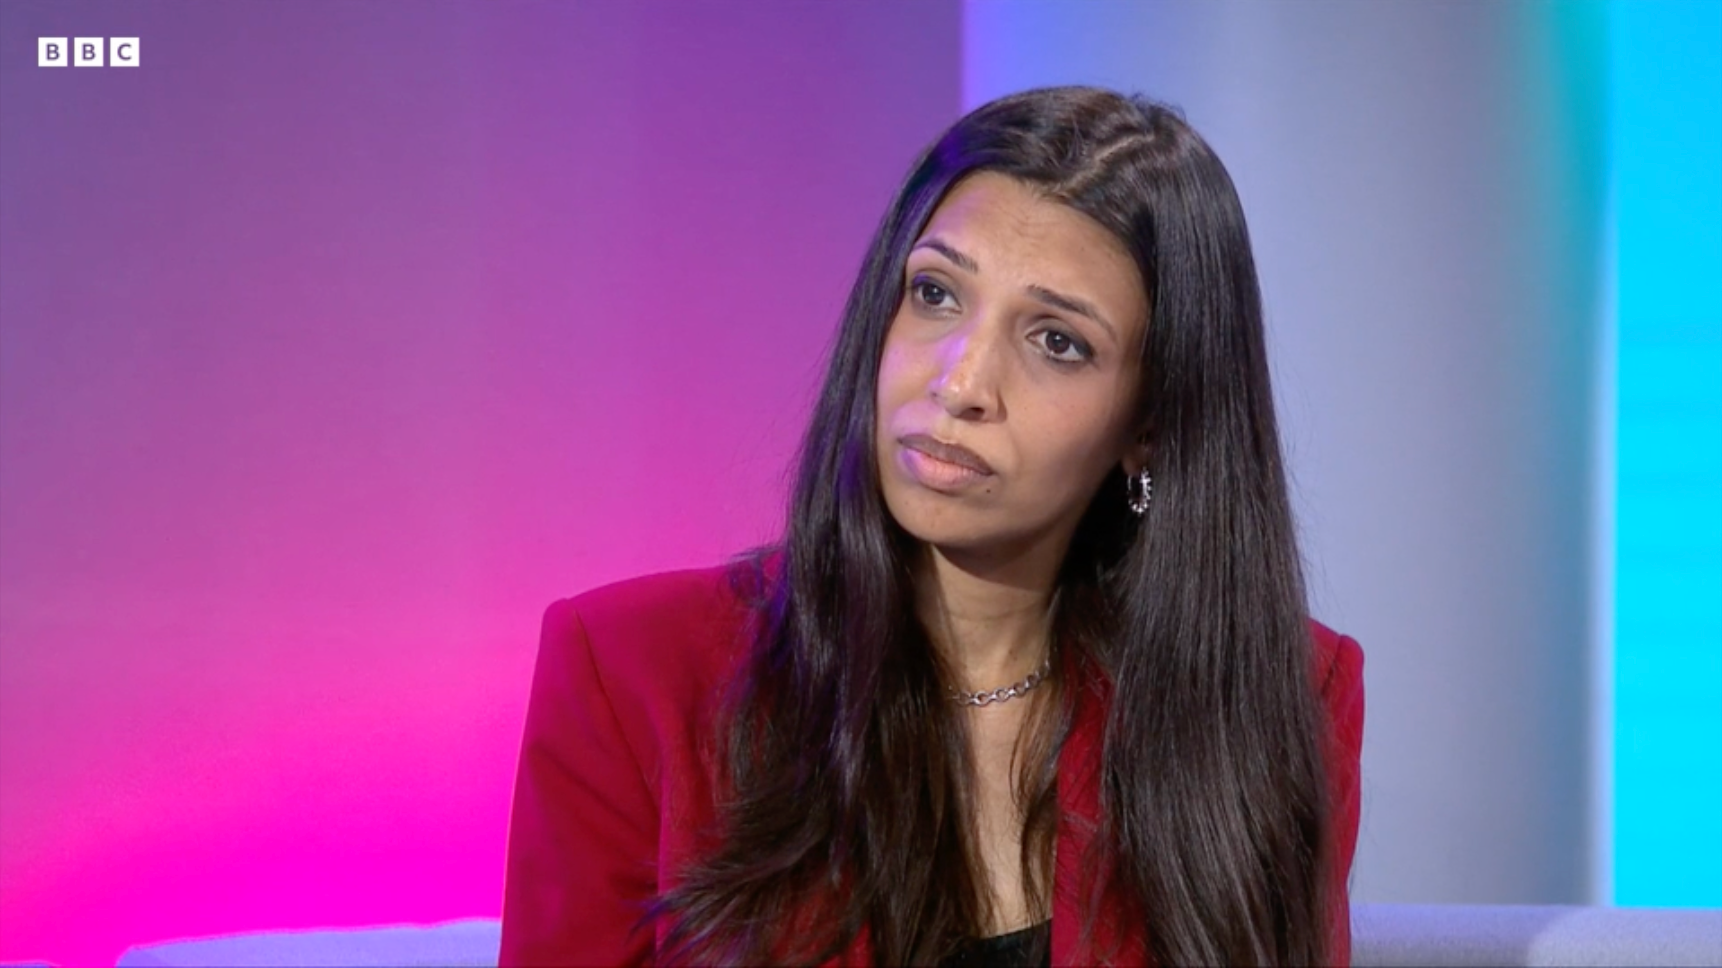 Faiza Shaheen was interviewed on BBC Newsnight hours after her deselection was confirmed